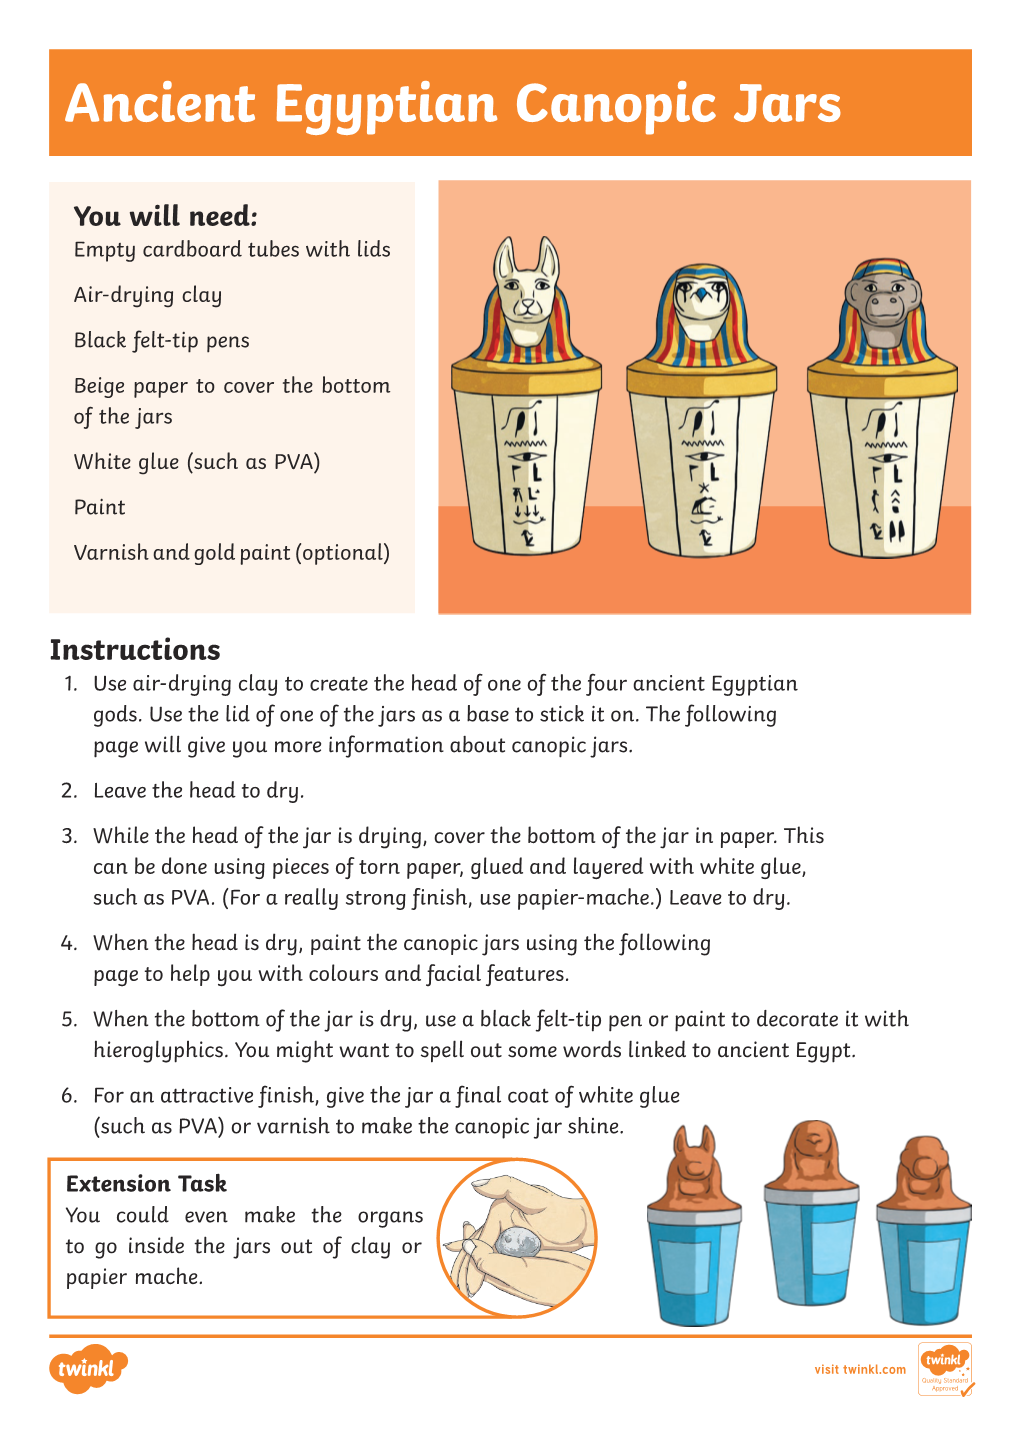 Ancient Egyptian Canopic Jars